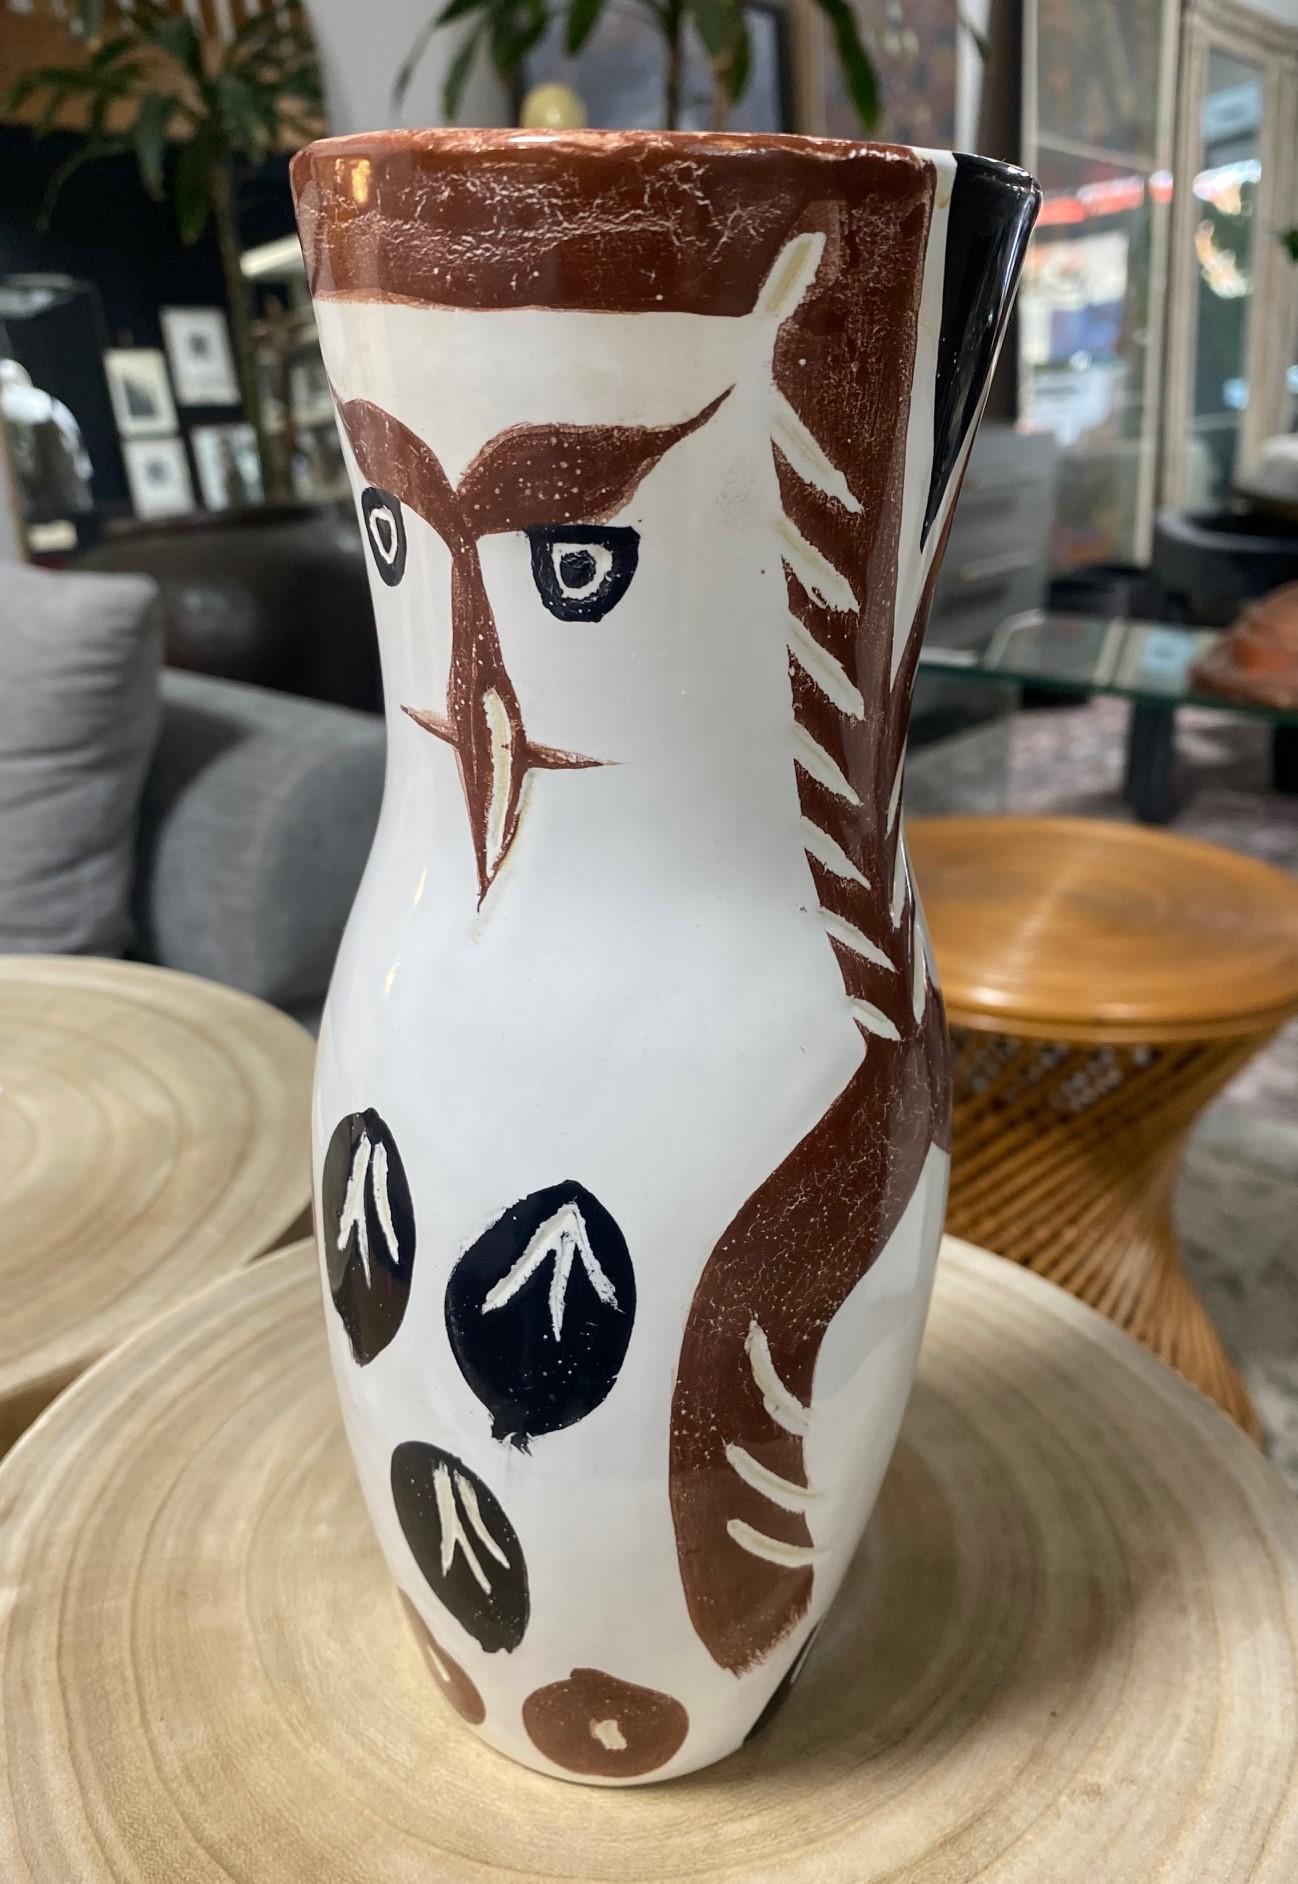 Ceramic Pablo Picasso Signed Limited Madoura Pottery Chouetton Owl Vase A.R. 135, 1952 For Sale